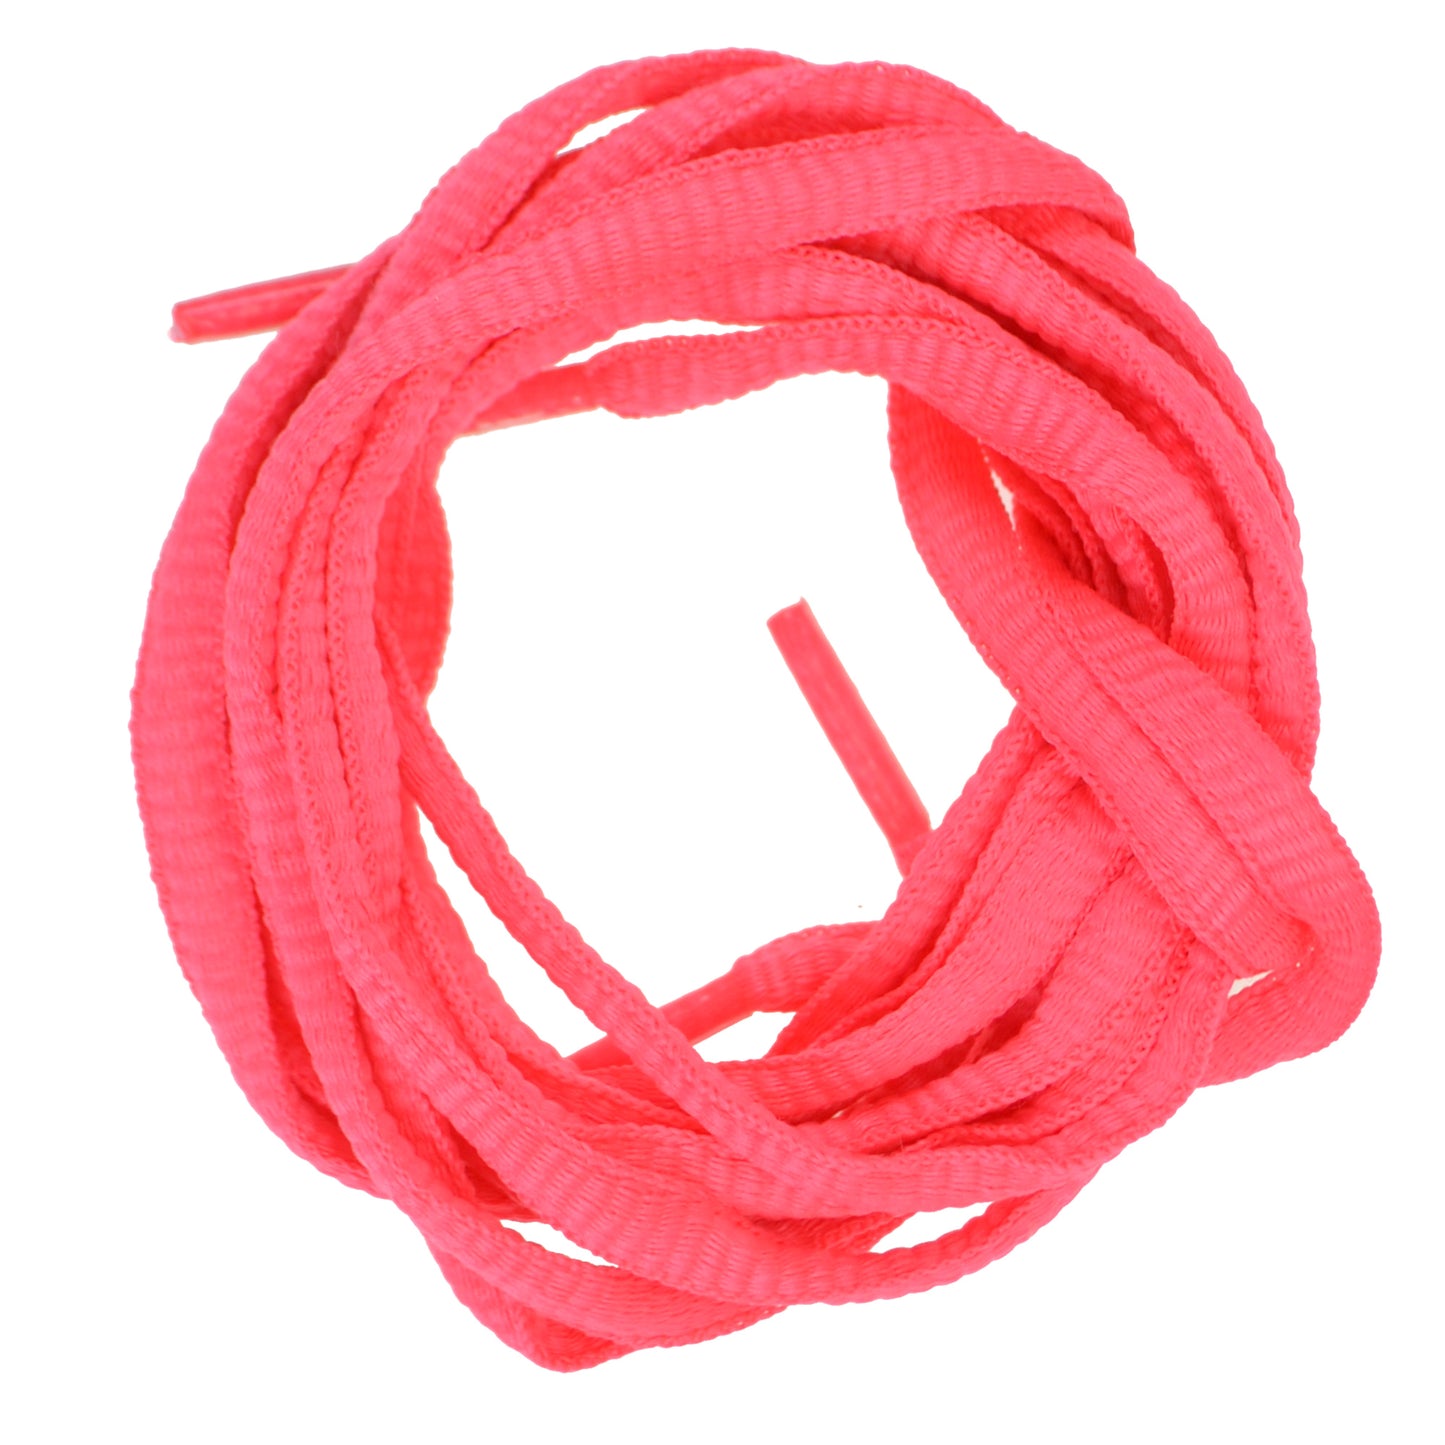 130cm Oval Trainer Laces - Fluorescent Pink